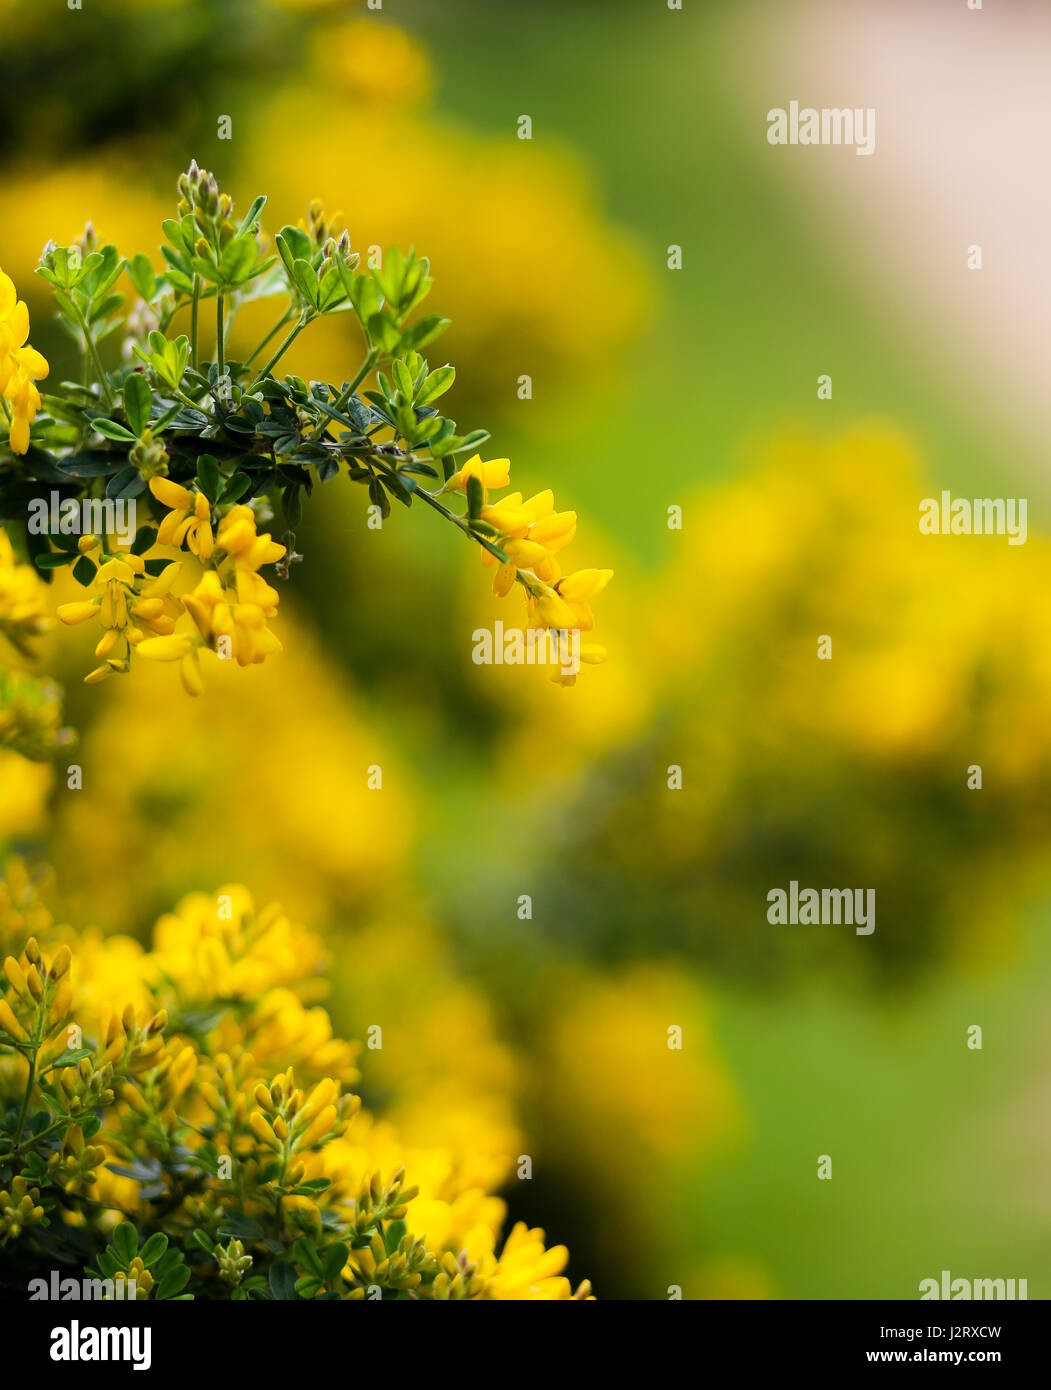 Yellow flowers of the common gorse bush with a blurry background growing in park Stock Photo